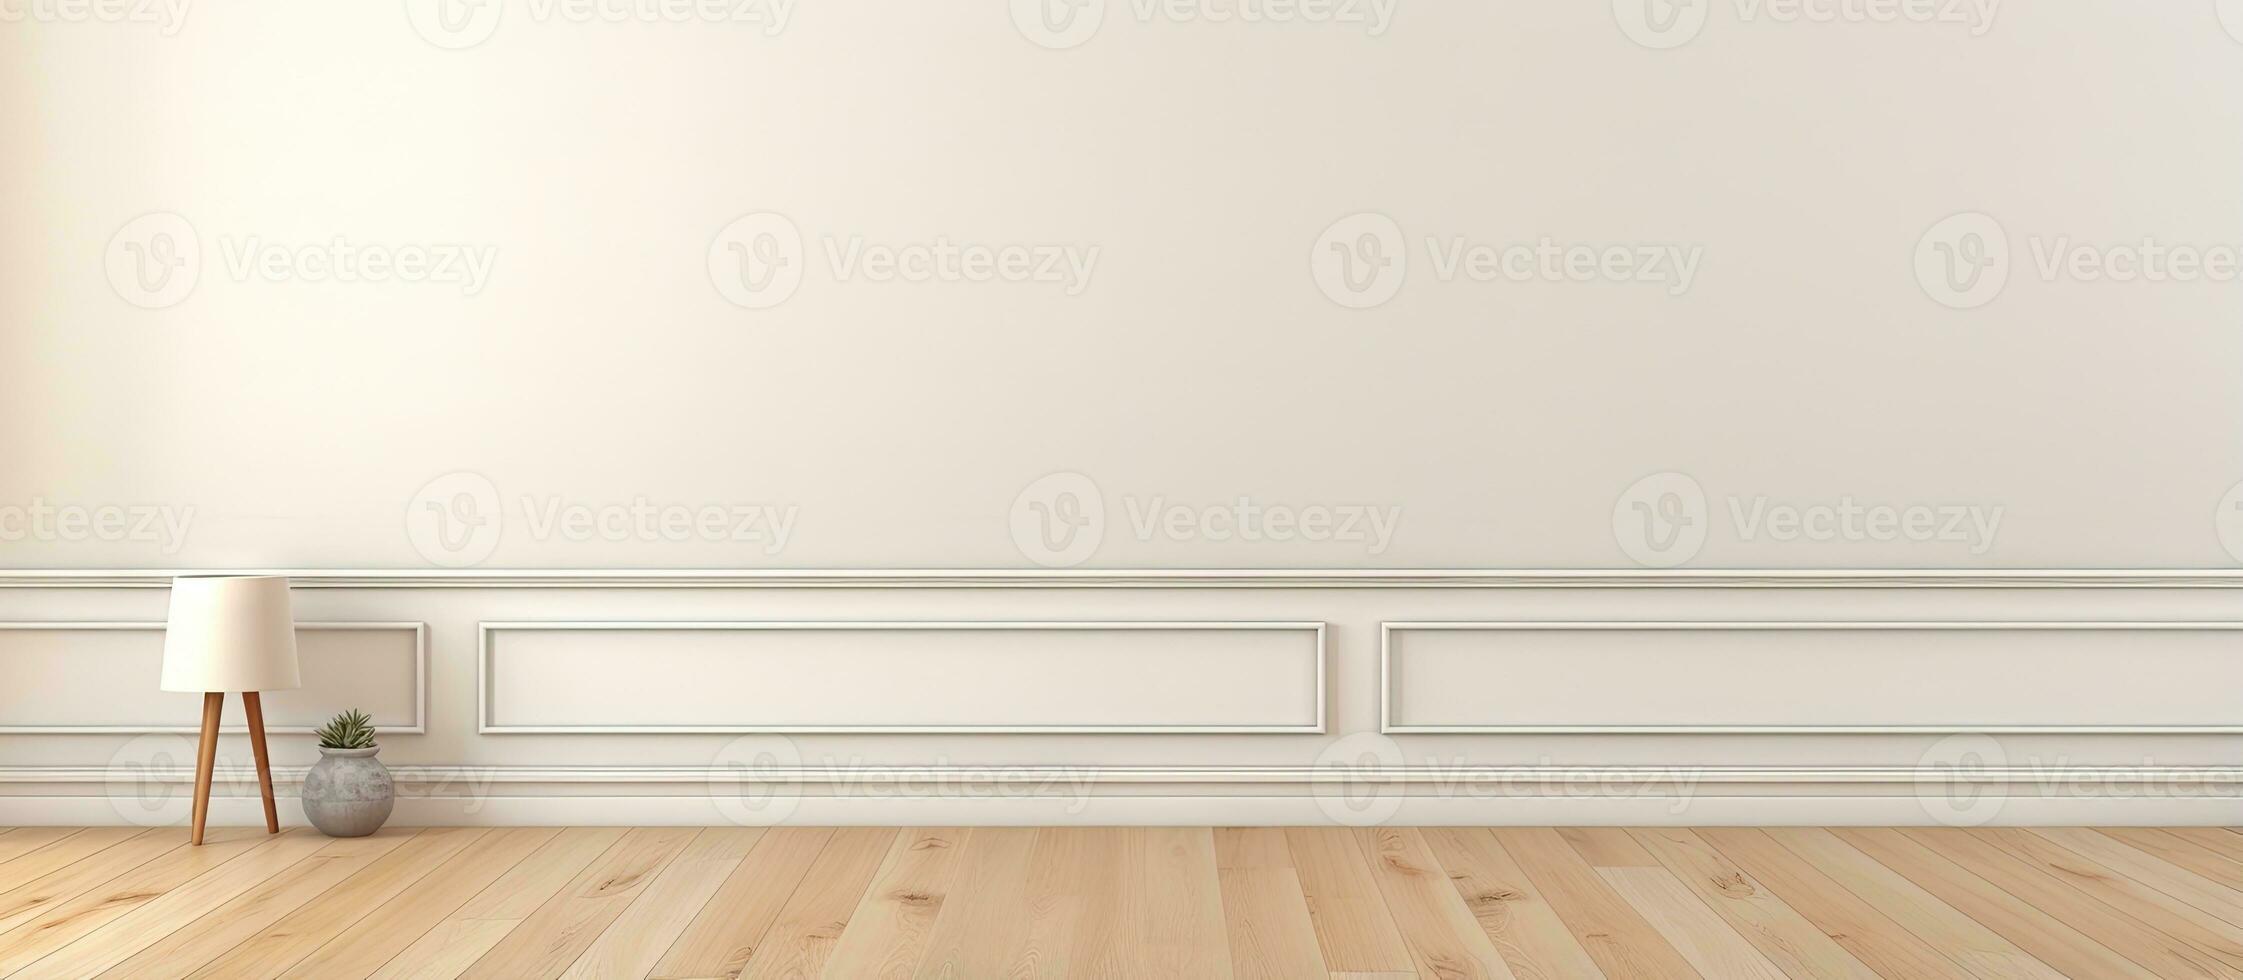 empty living room with vintage oak floor and striped vinyl wallpaper photo